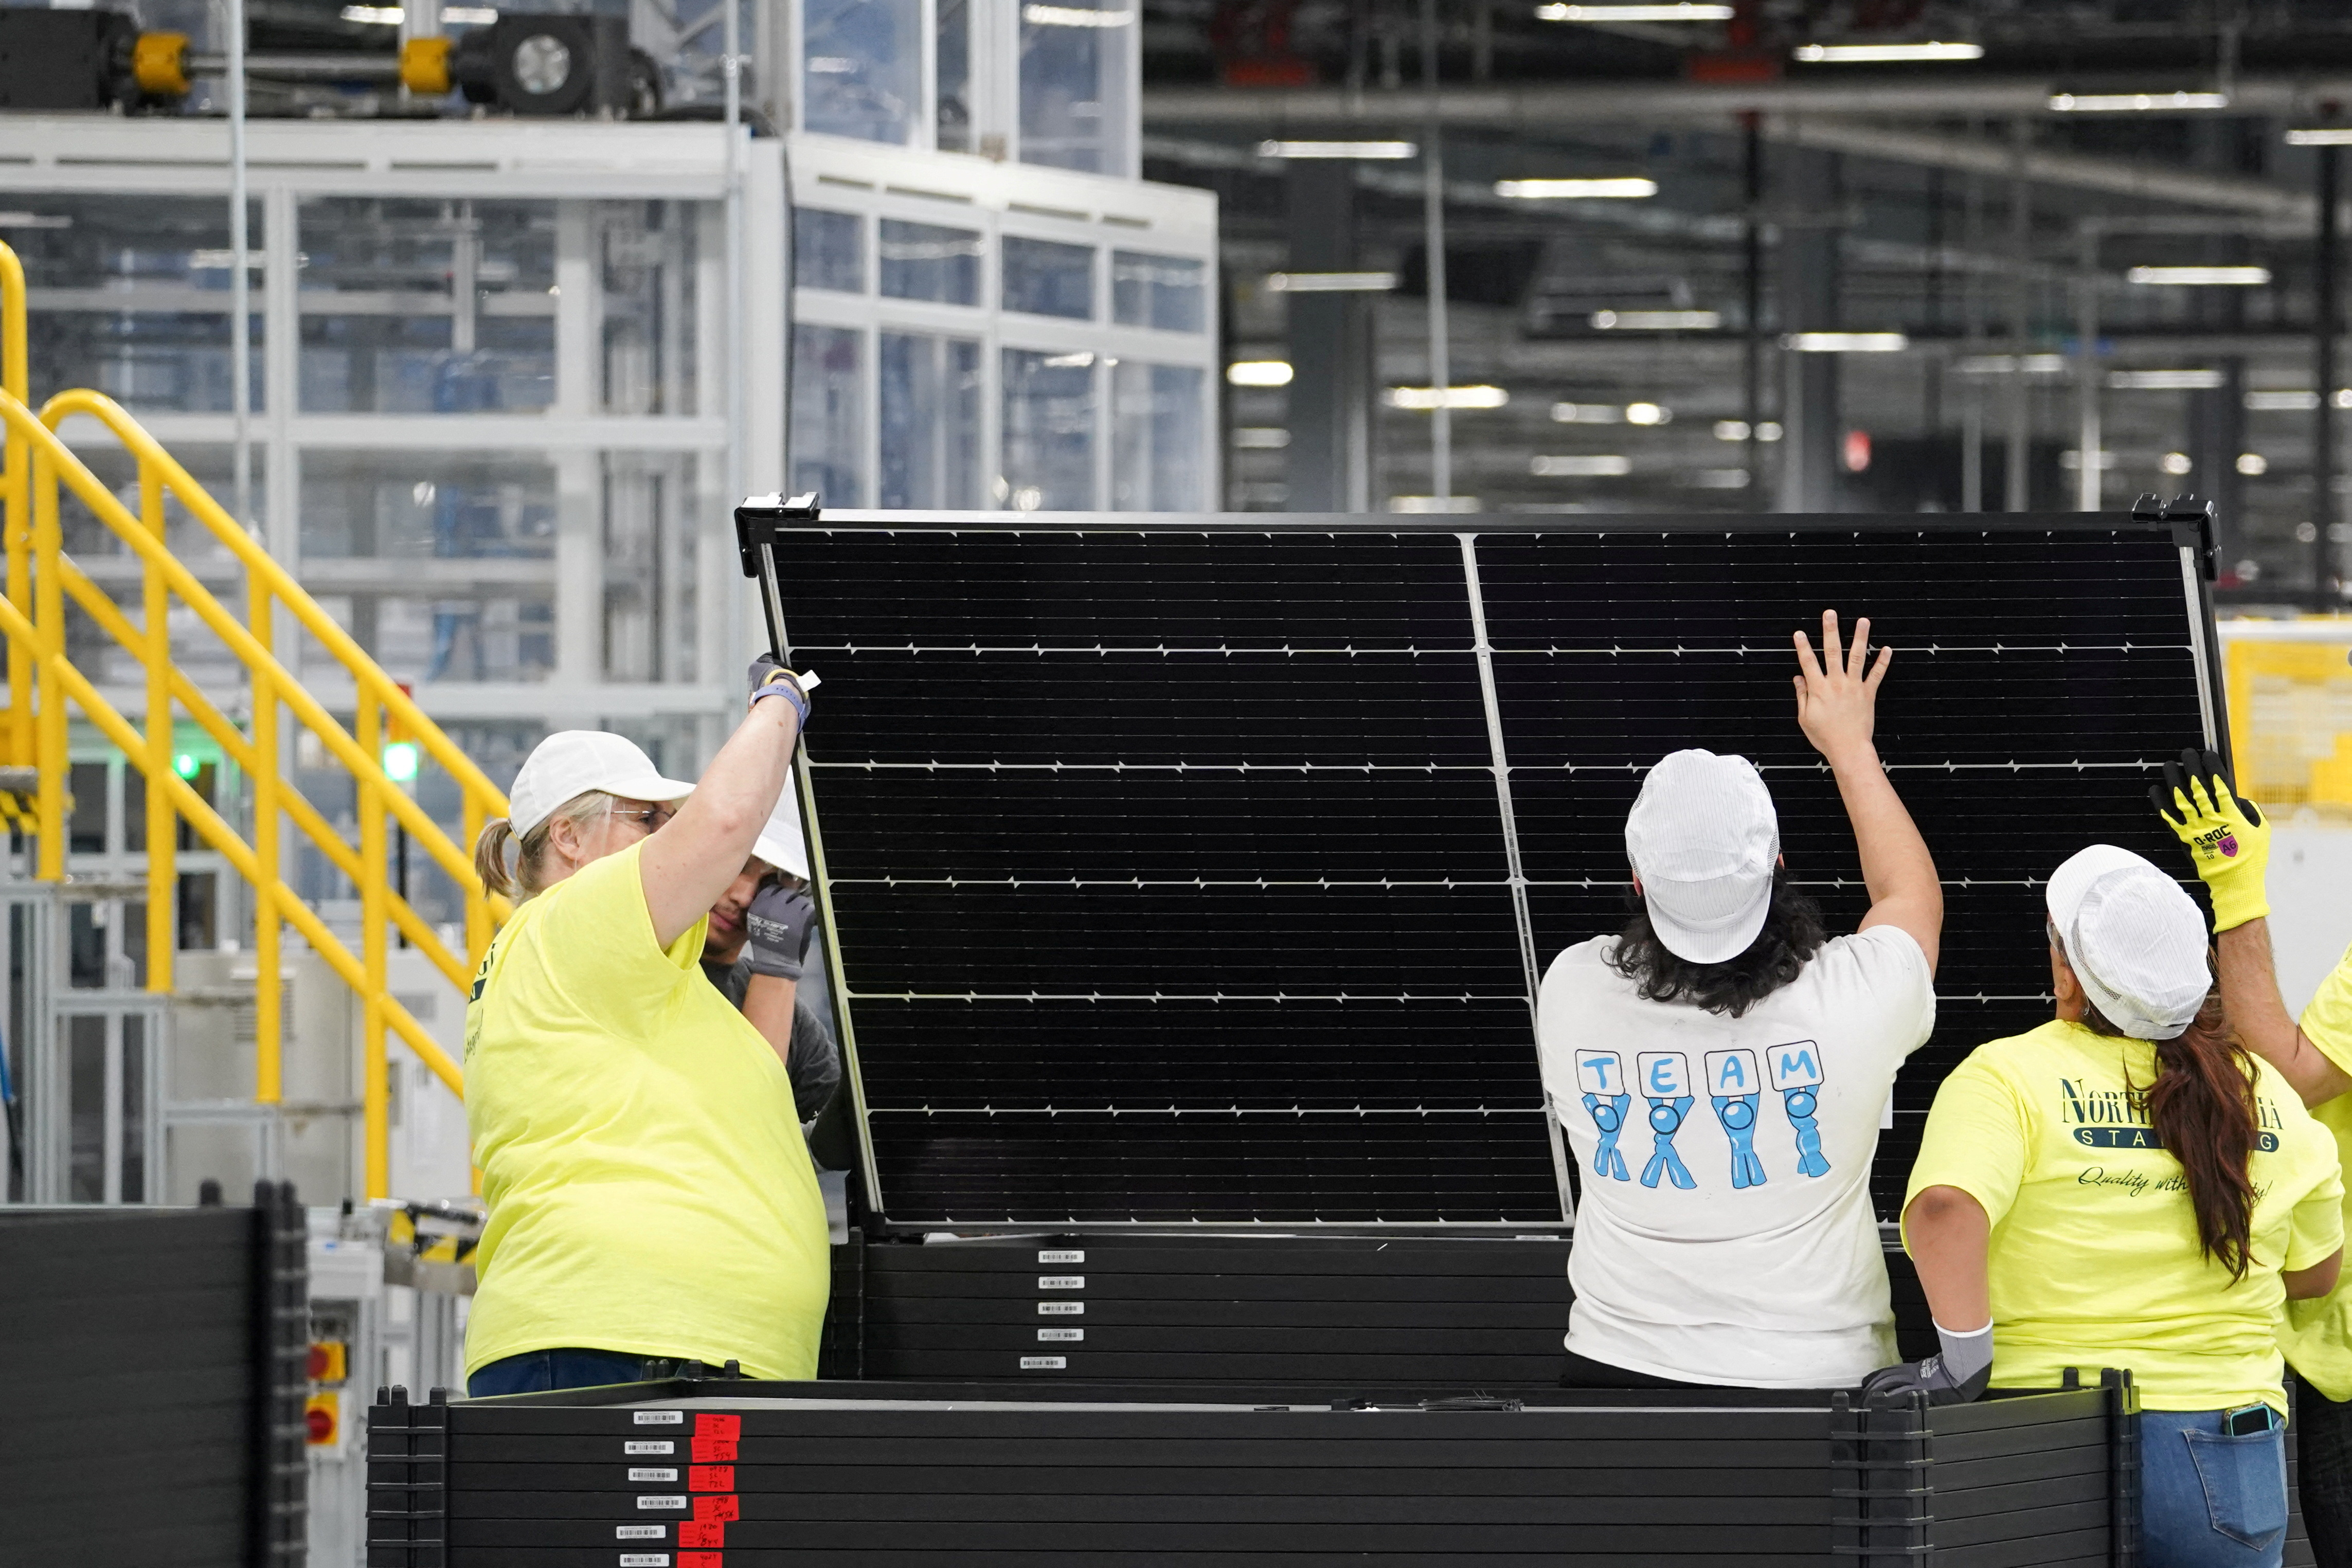 Employees work on solar panels at the QCells solar manufacturing factory in Dalton